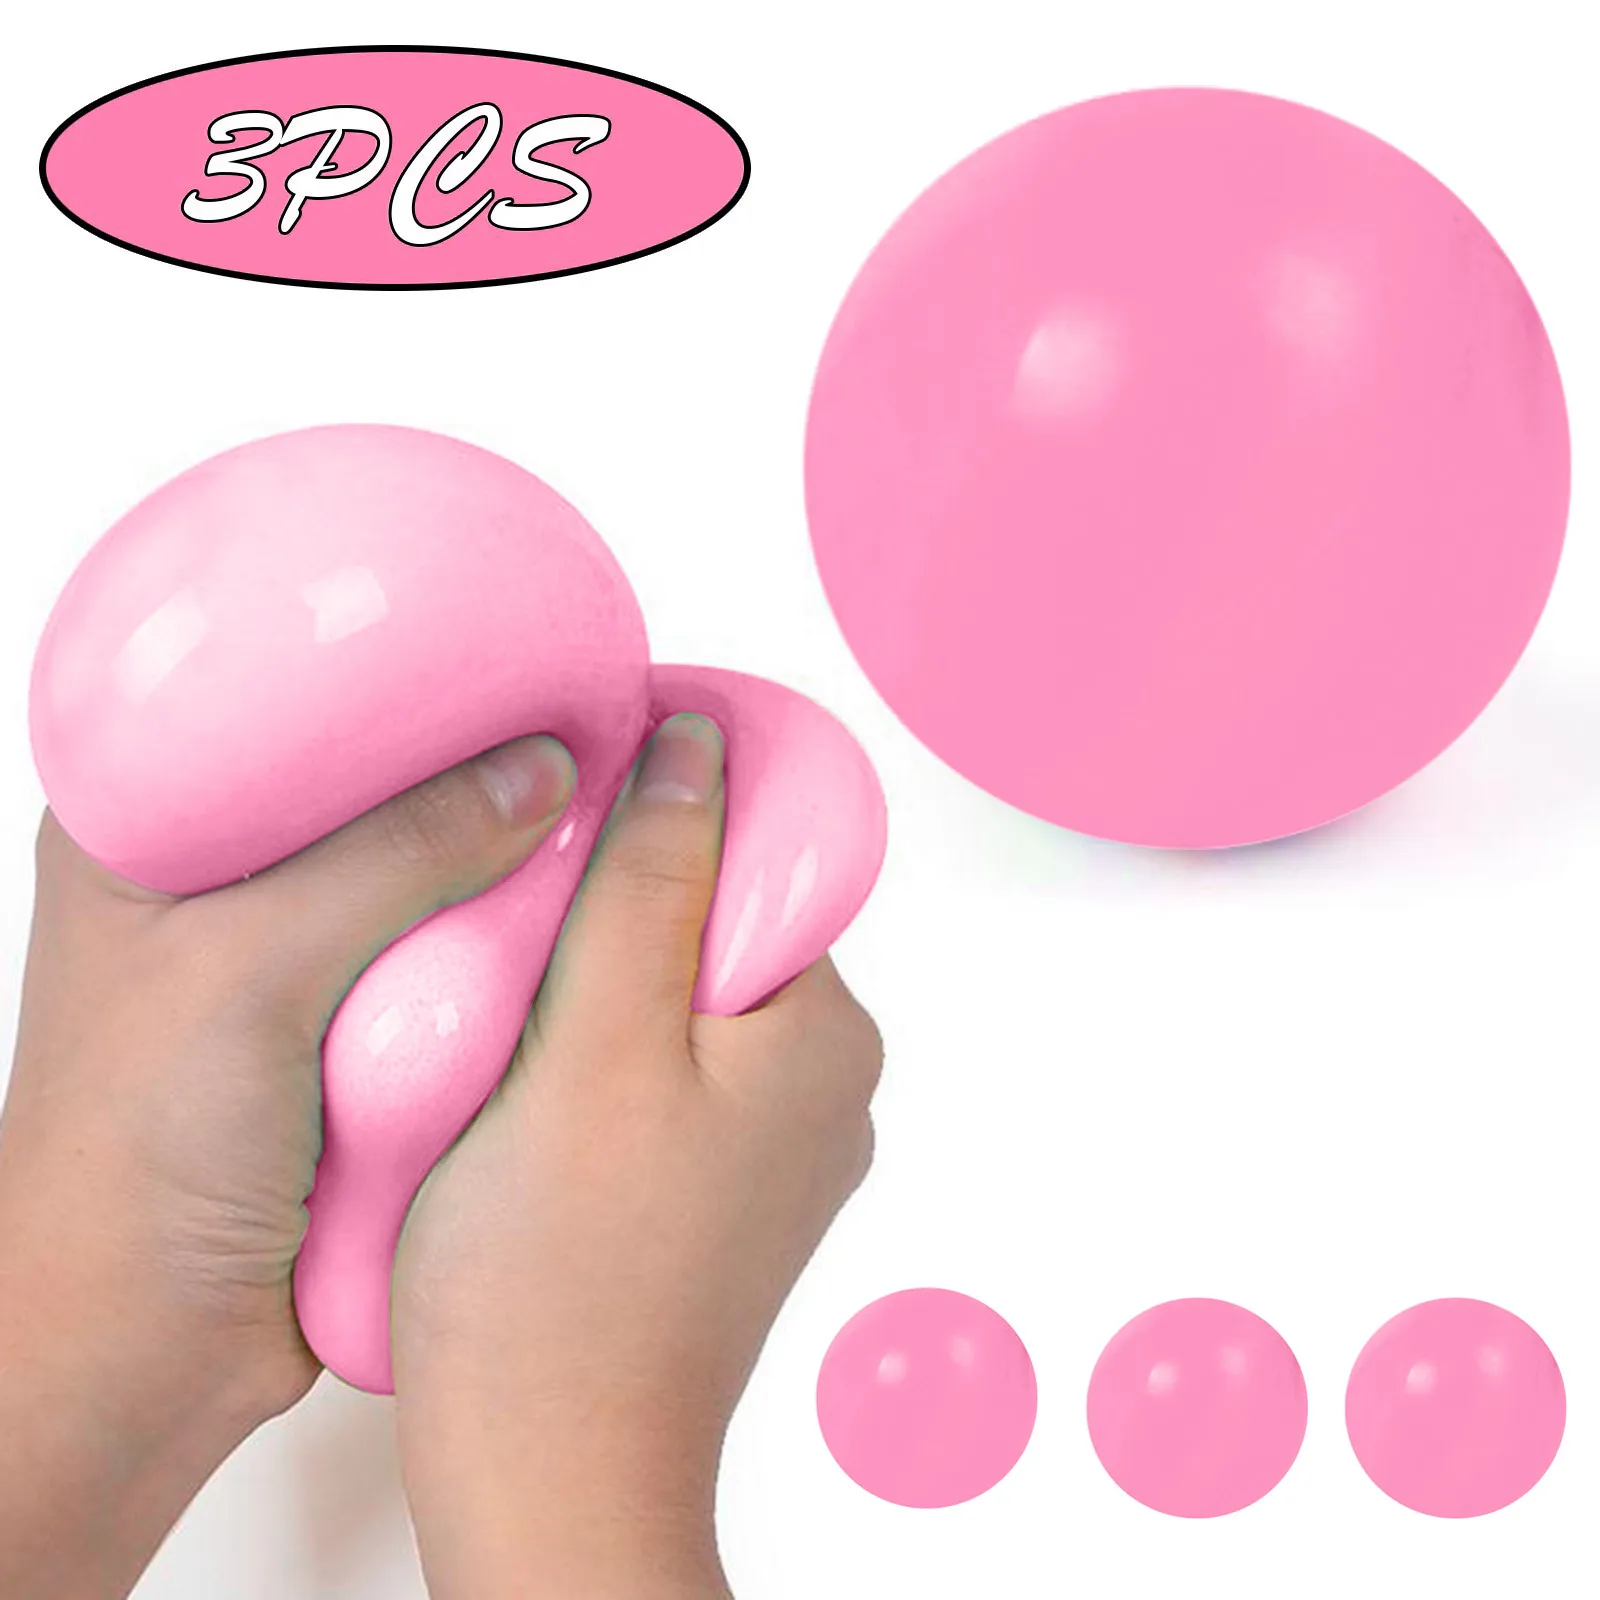 

2021 toys for children Stress Relief Squeezing Balls Creative Colorful Soft Novelty Hand Grip Pressure kids gift brinquedo #L2